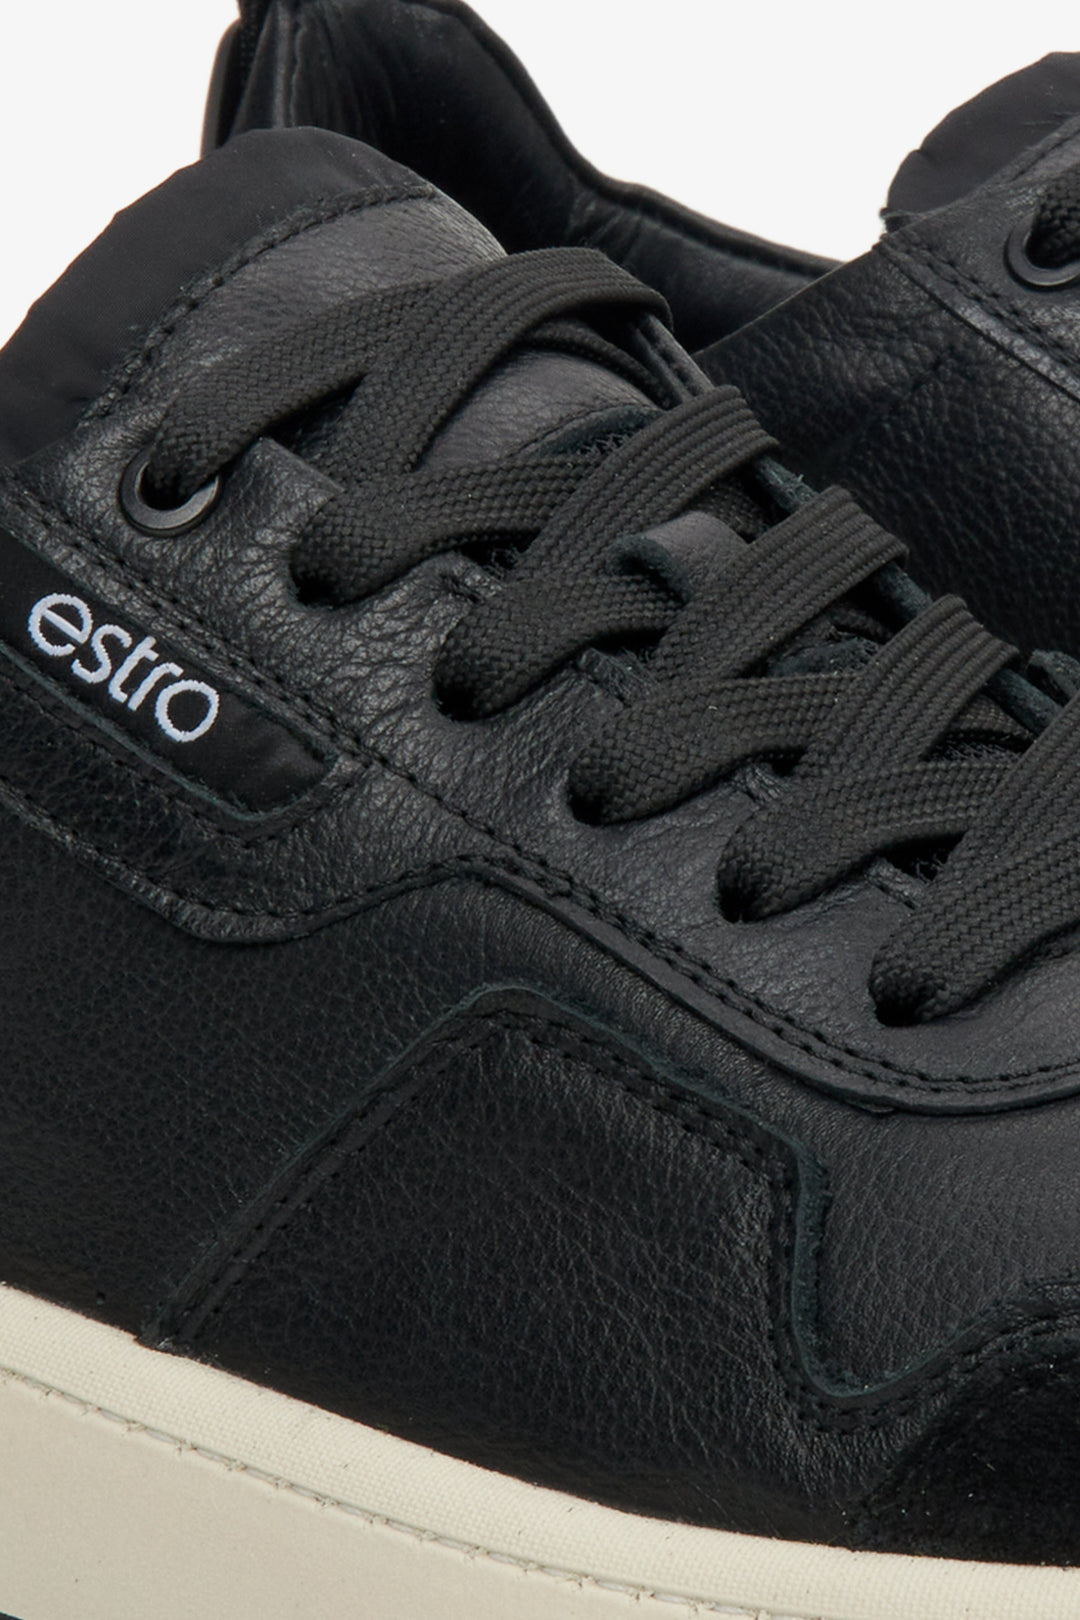 Men's black low-top sneakers - a close-up on details.